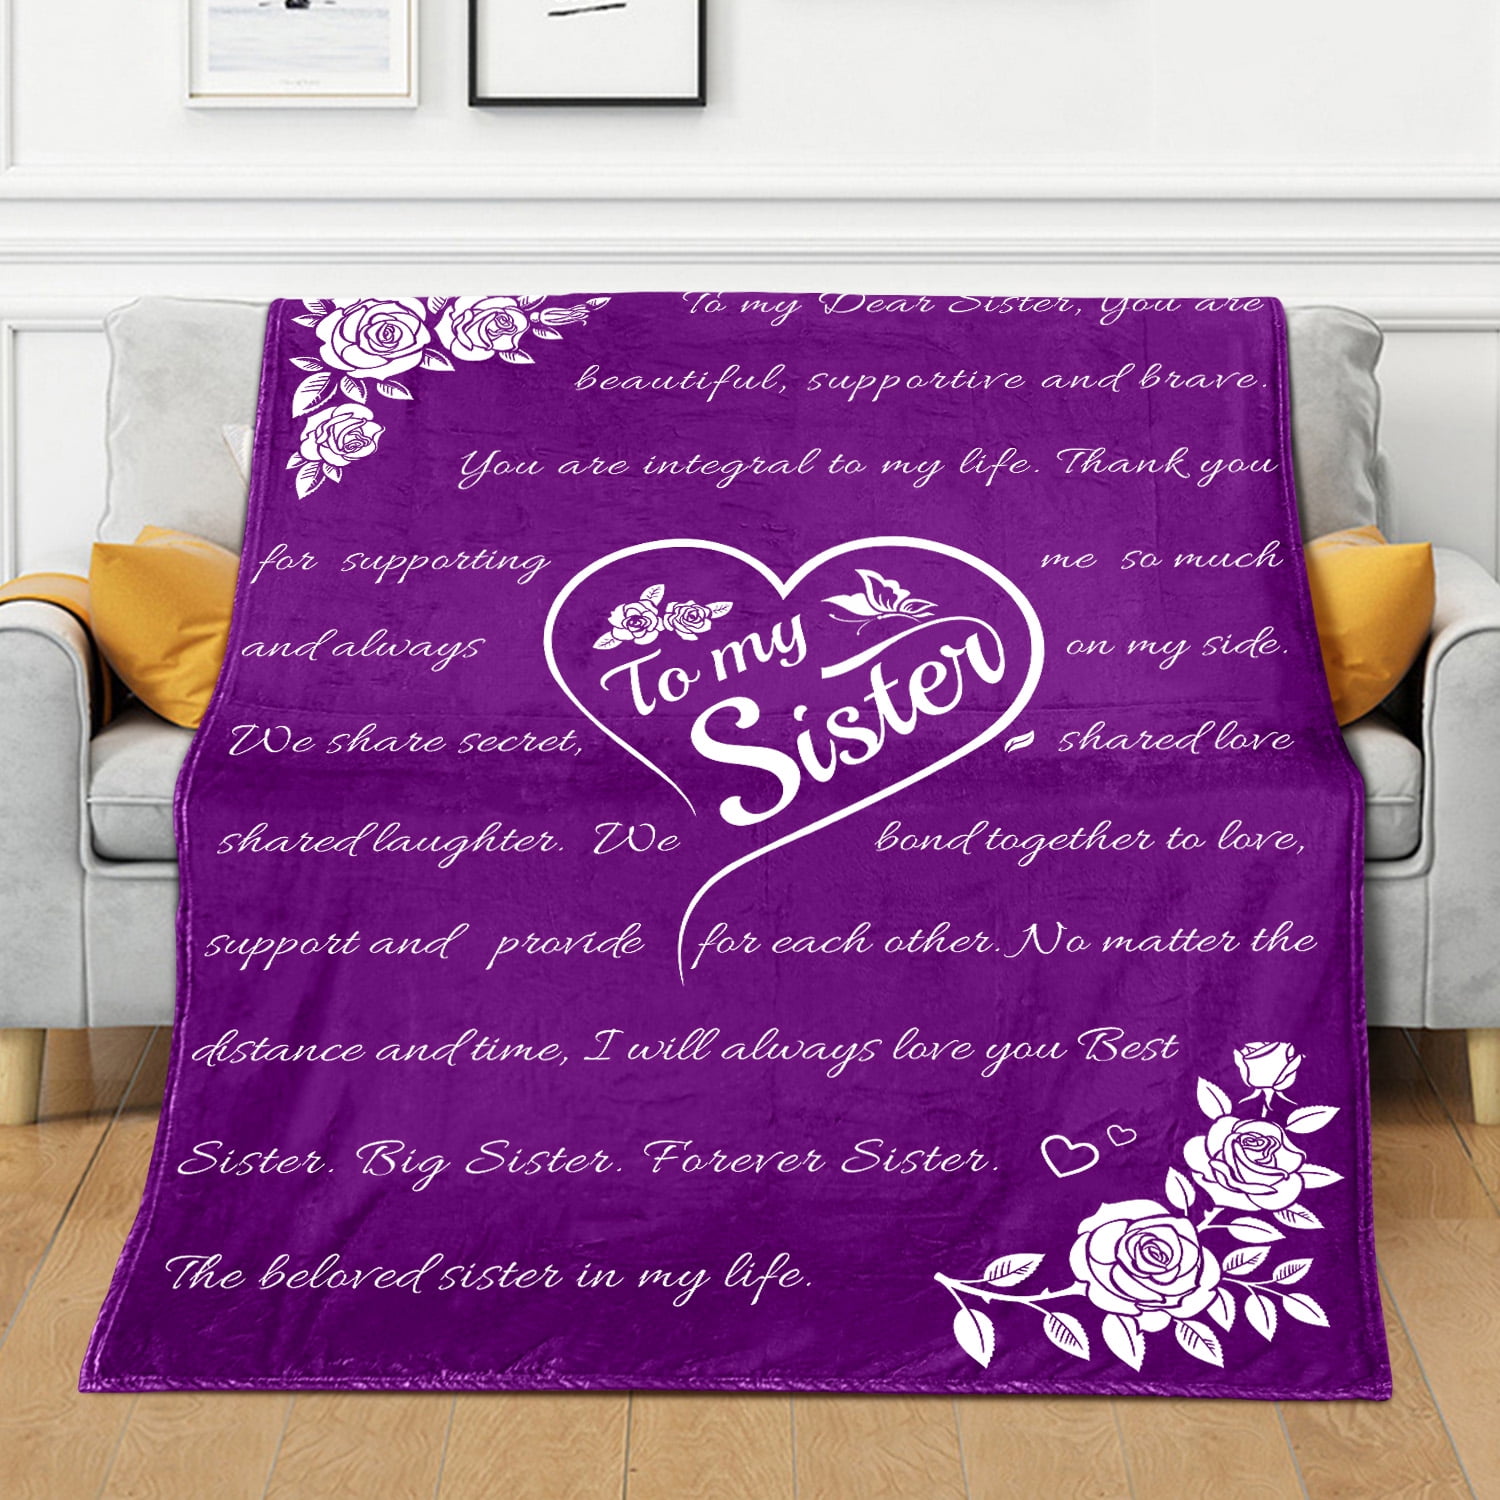  Mom Gifts, Mom Throw Blanket, Funny Boy Mom Birthday Gifts,  Throw Blanket for Boy Mother, 65 x 50 Inches, Purple : Home & Kitchen